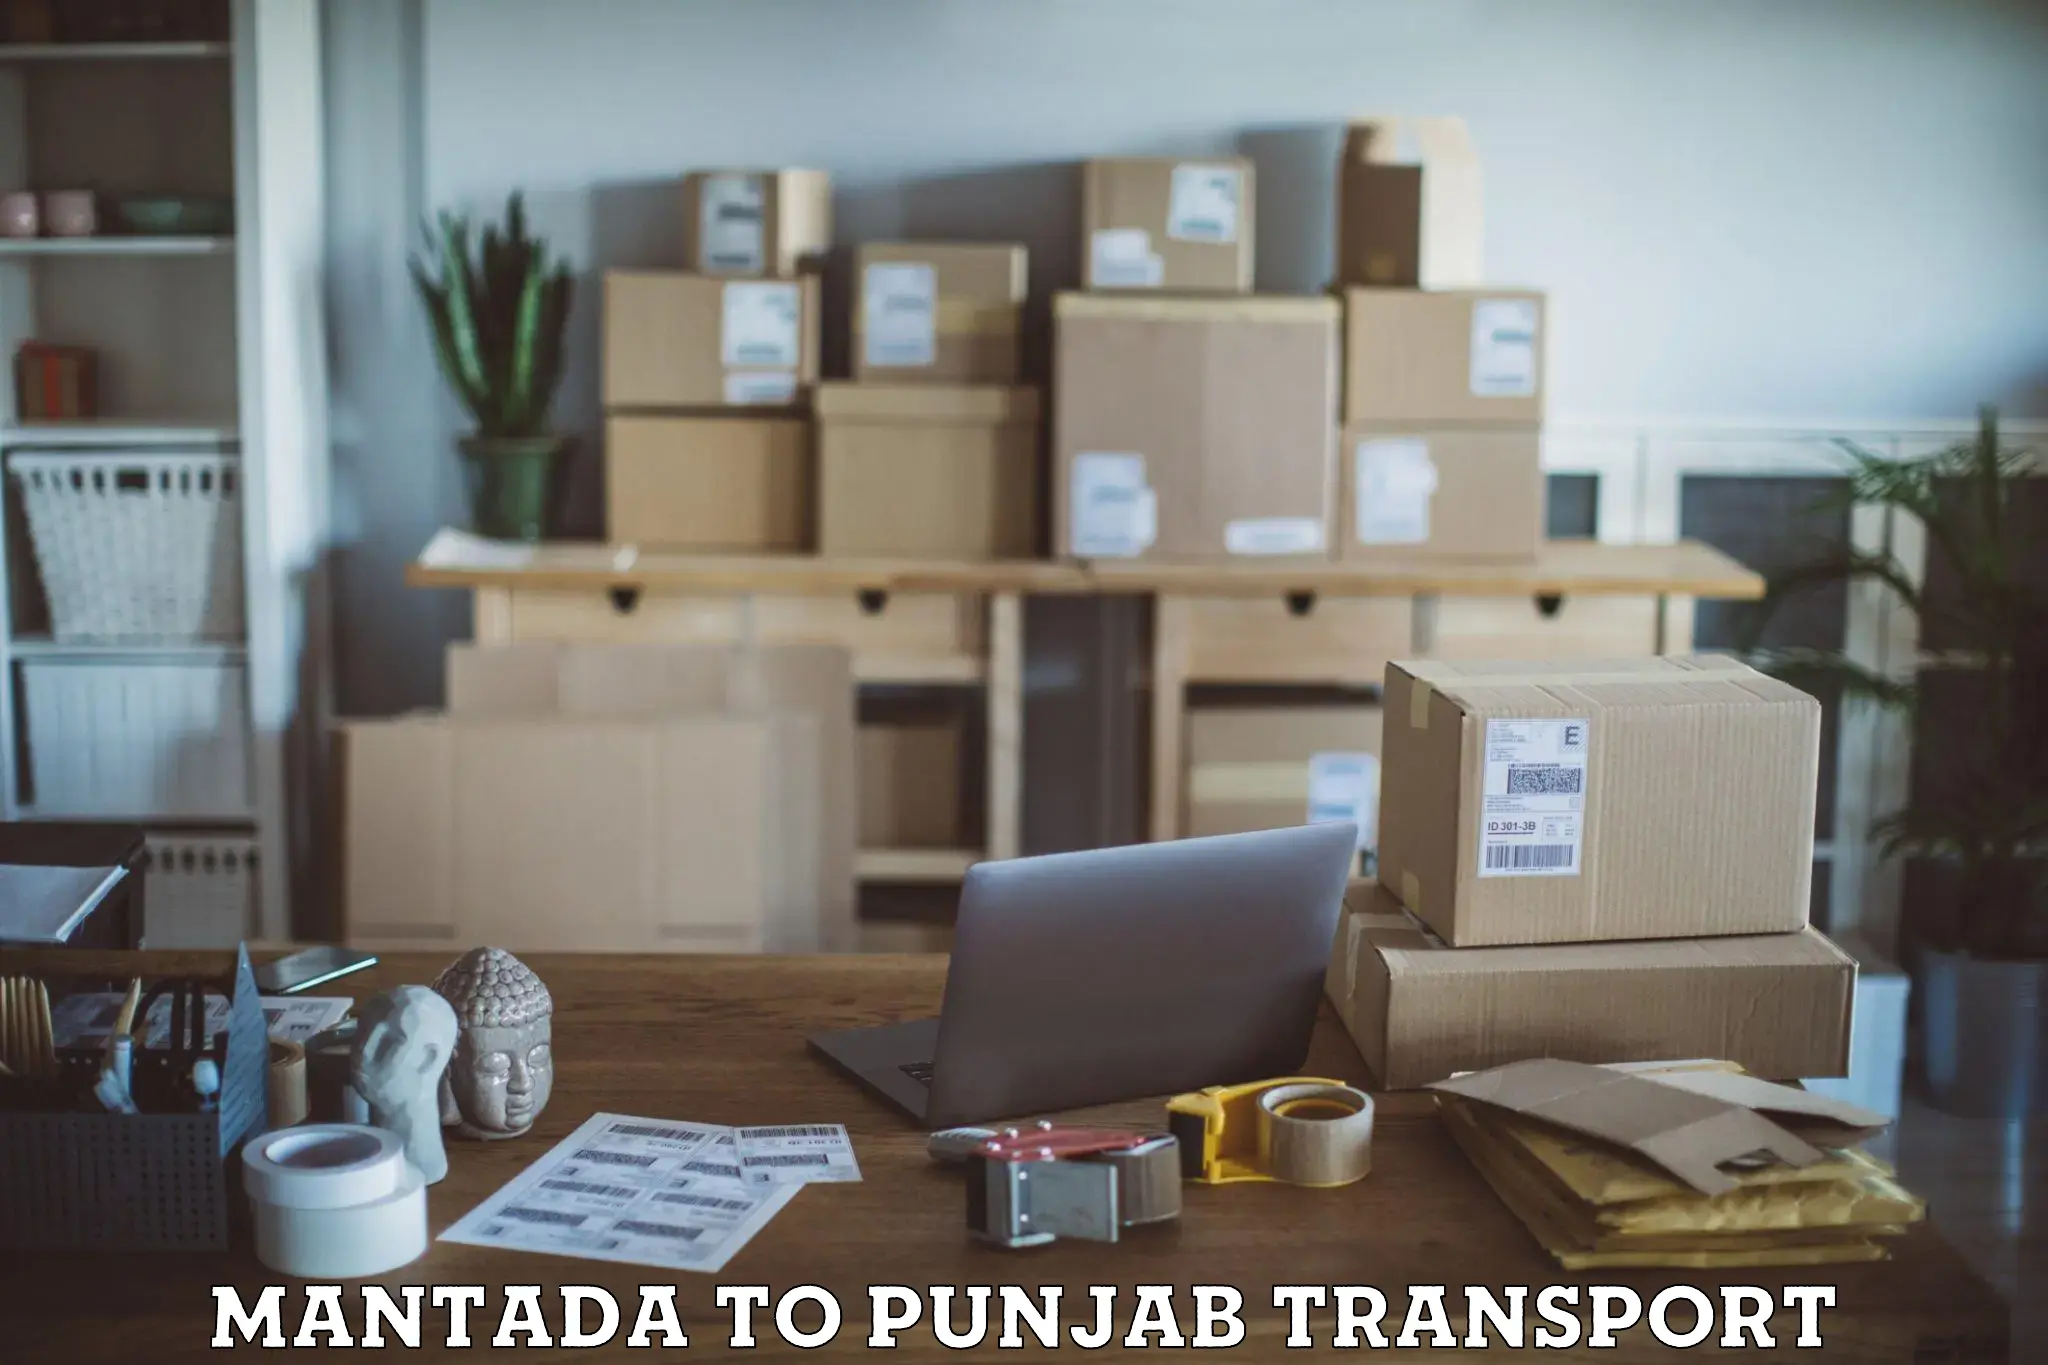 Online transport booking Mantada to Pathankot